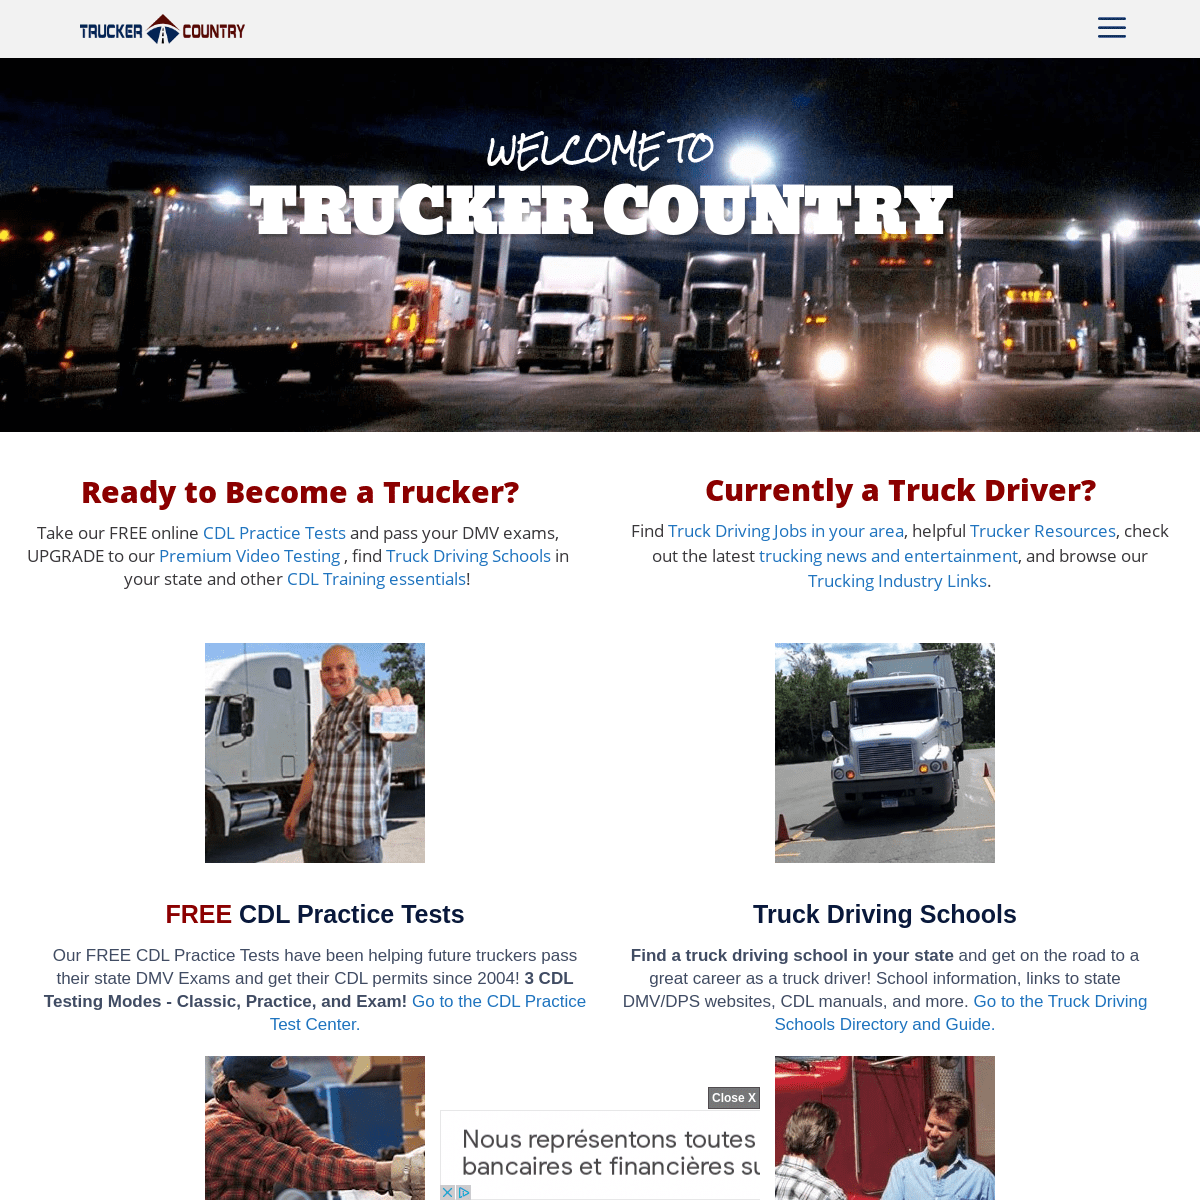 Trucker Country News, Jobs, CDL Tests, and Truck Driving Schools Info